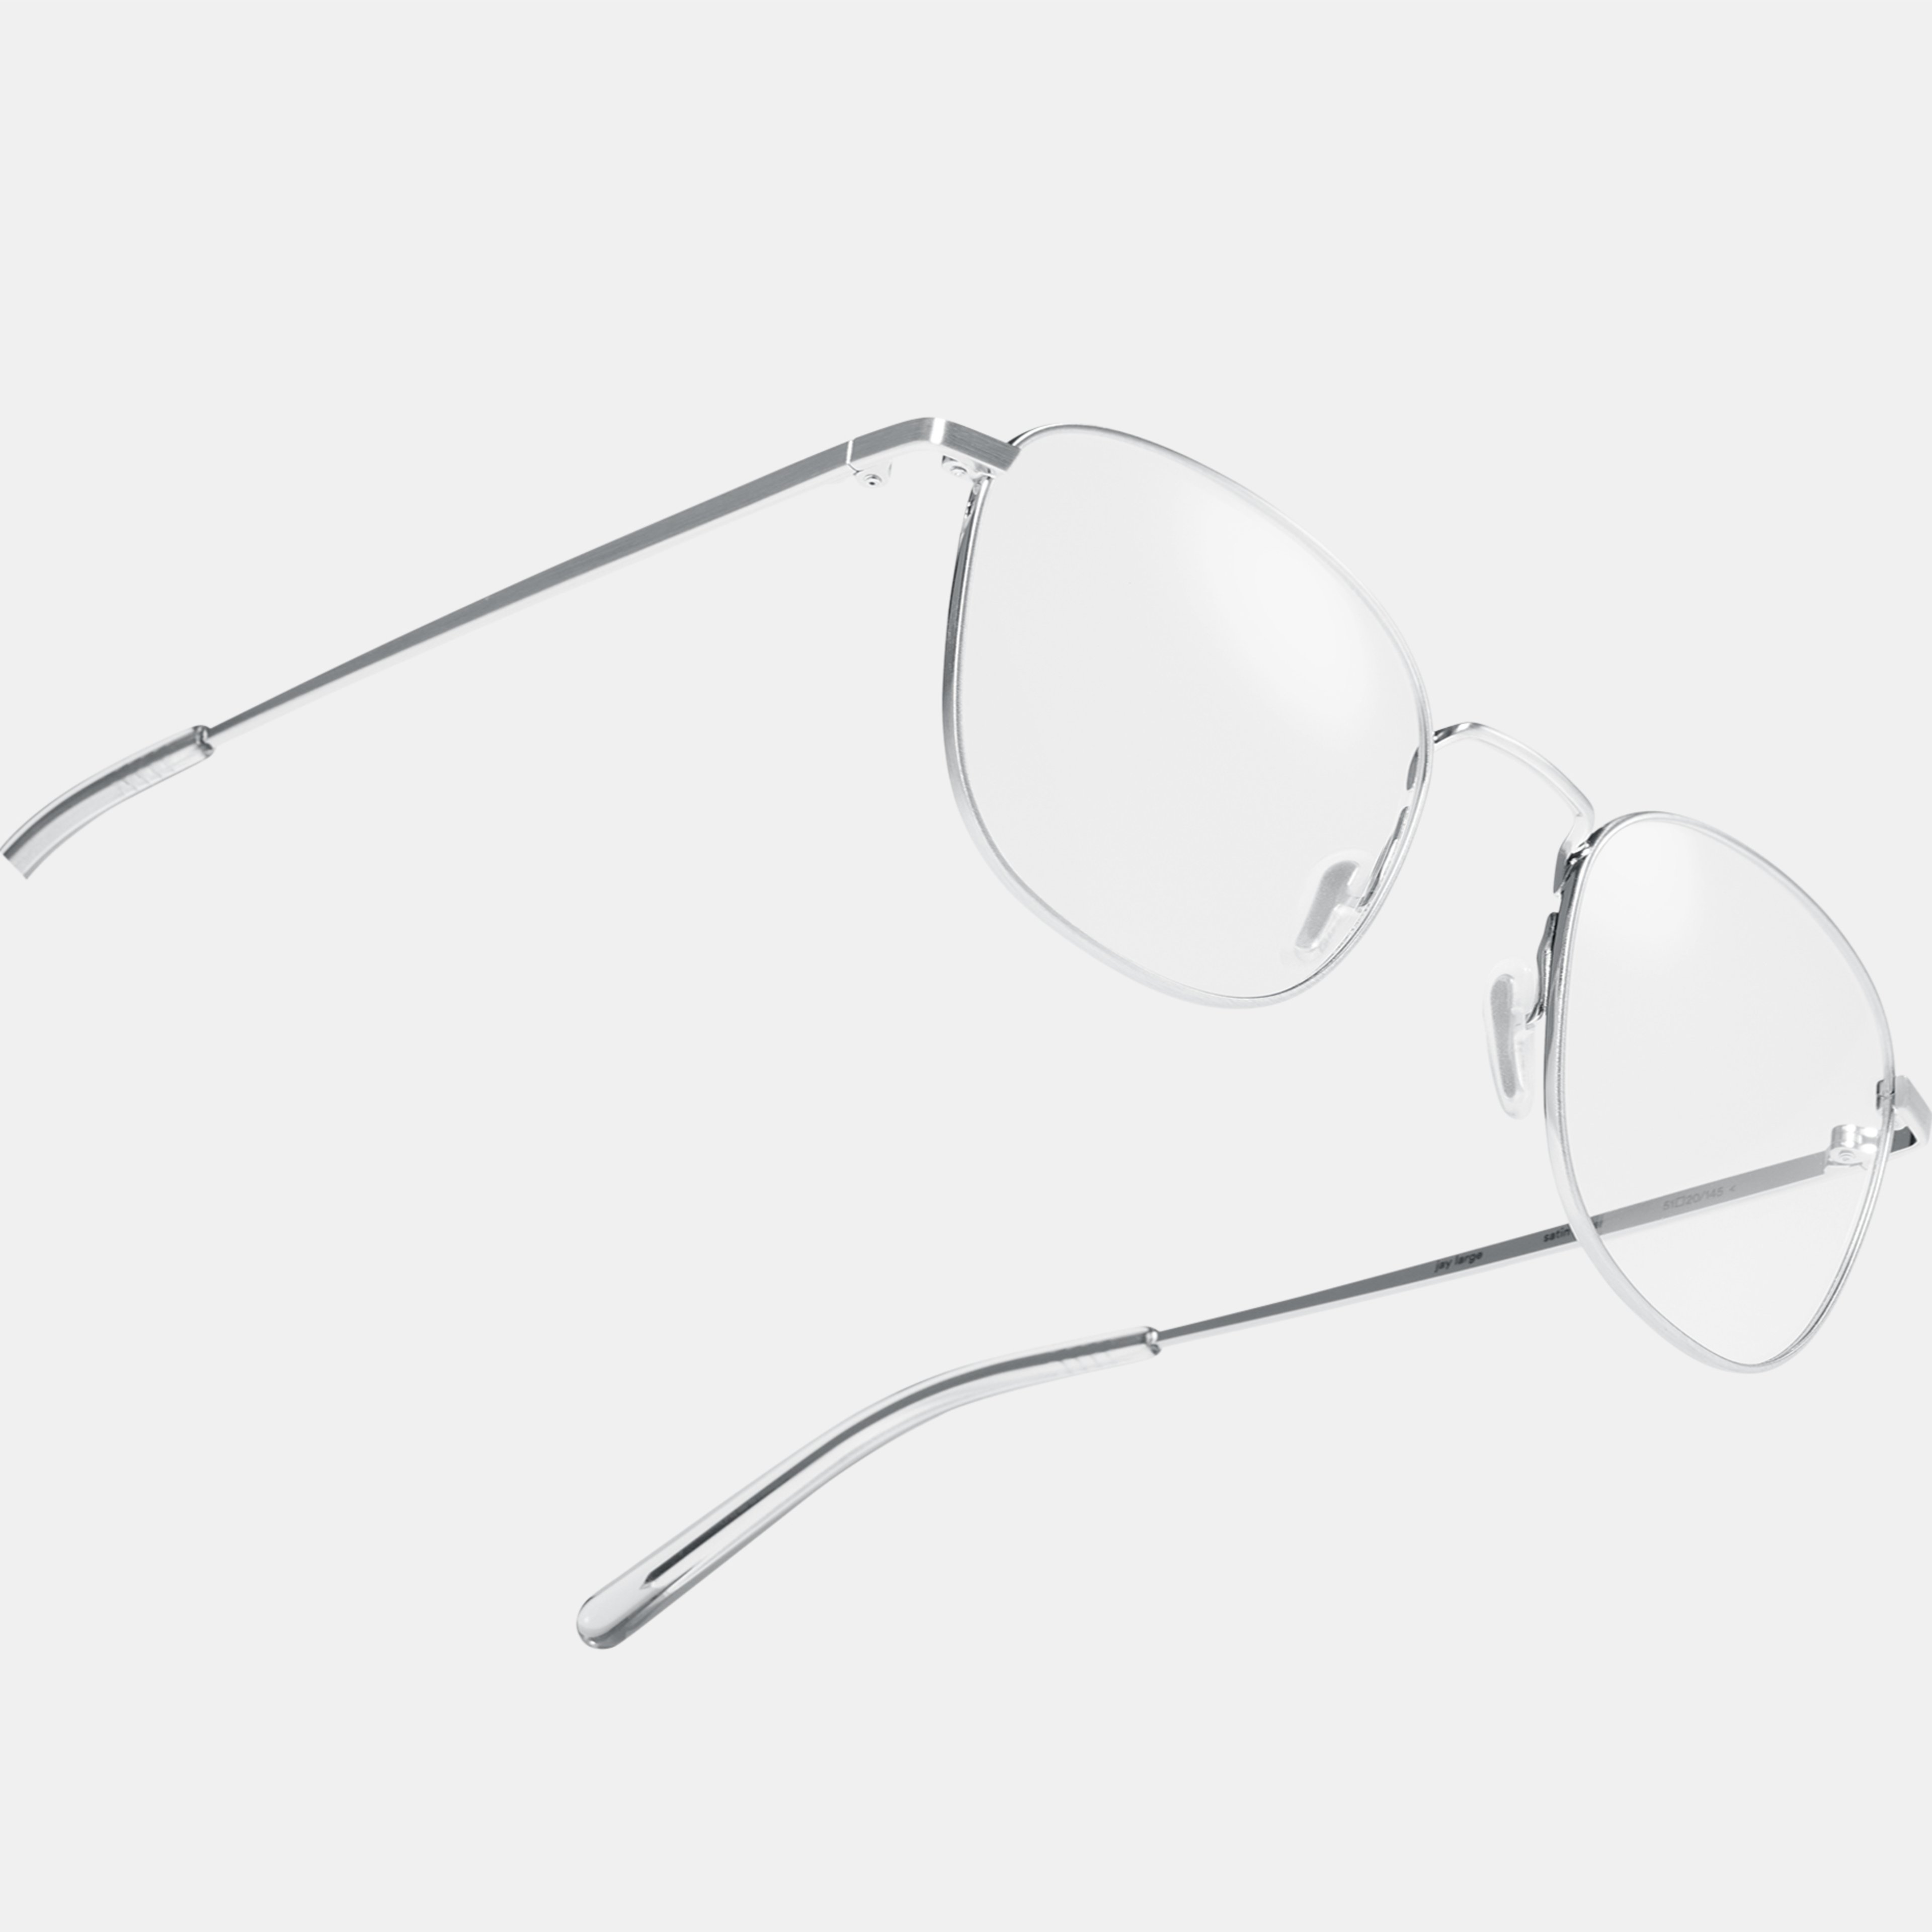 Ace & Tate Glasses | Square Metal in 